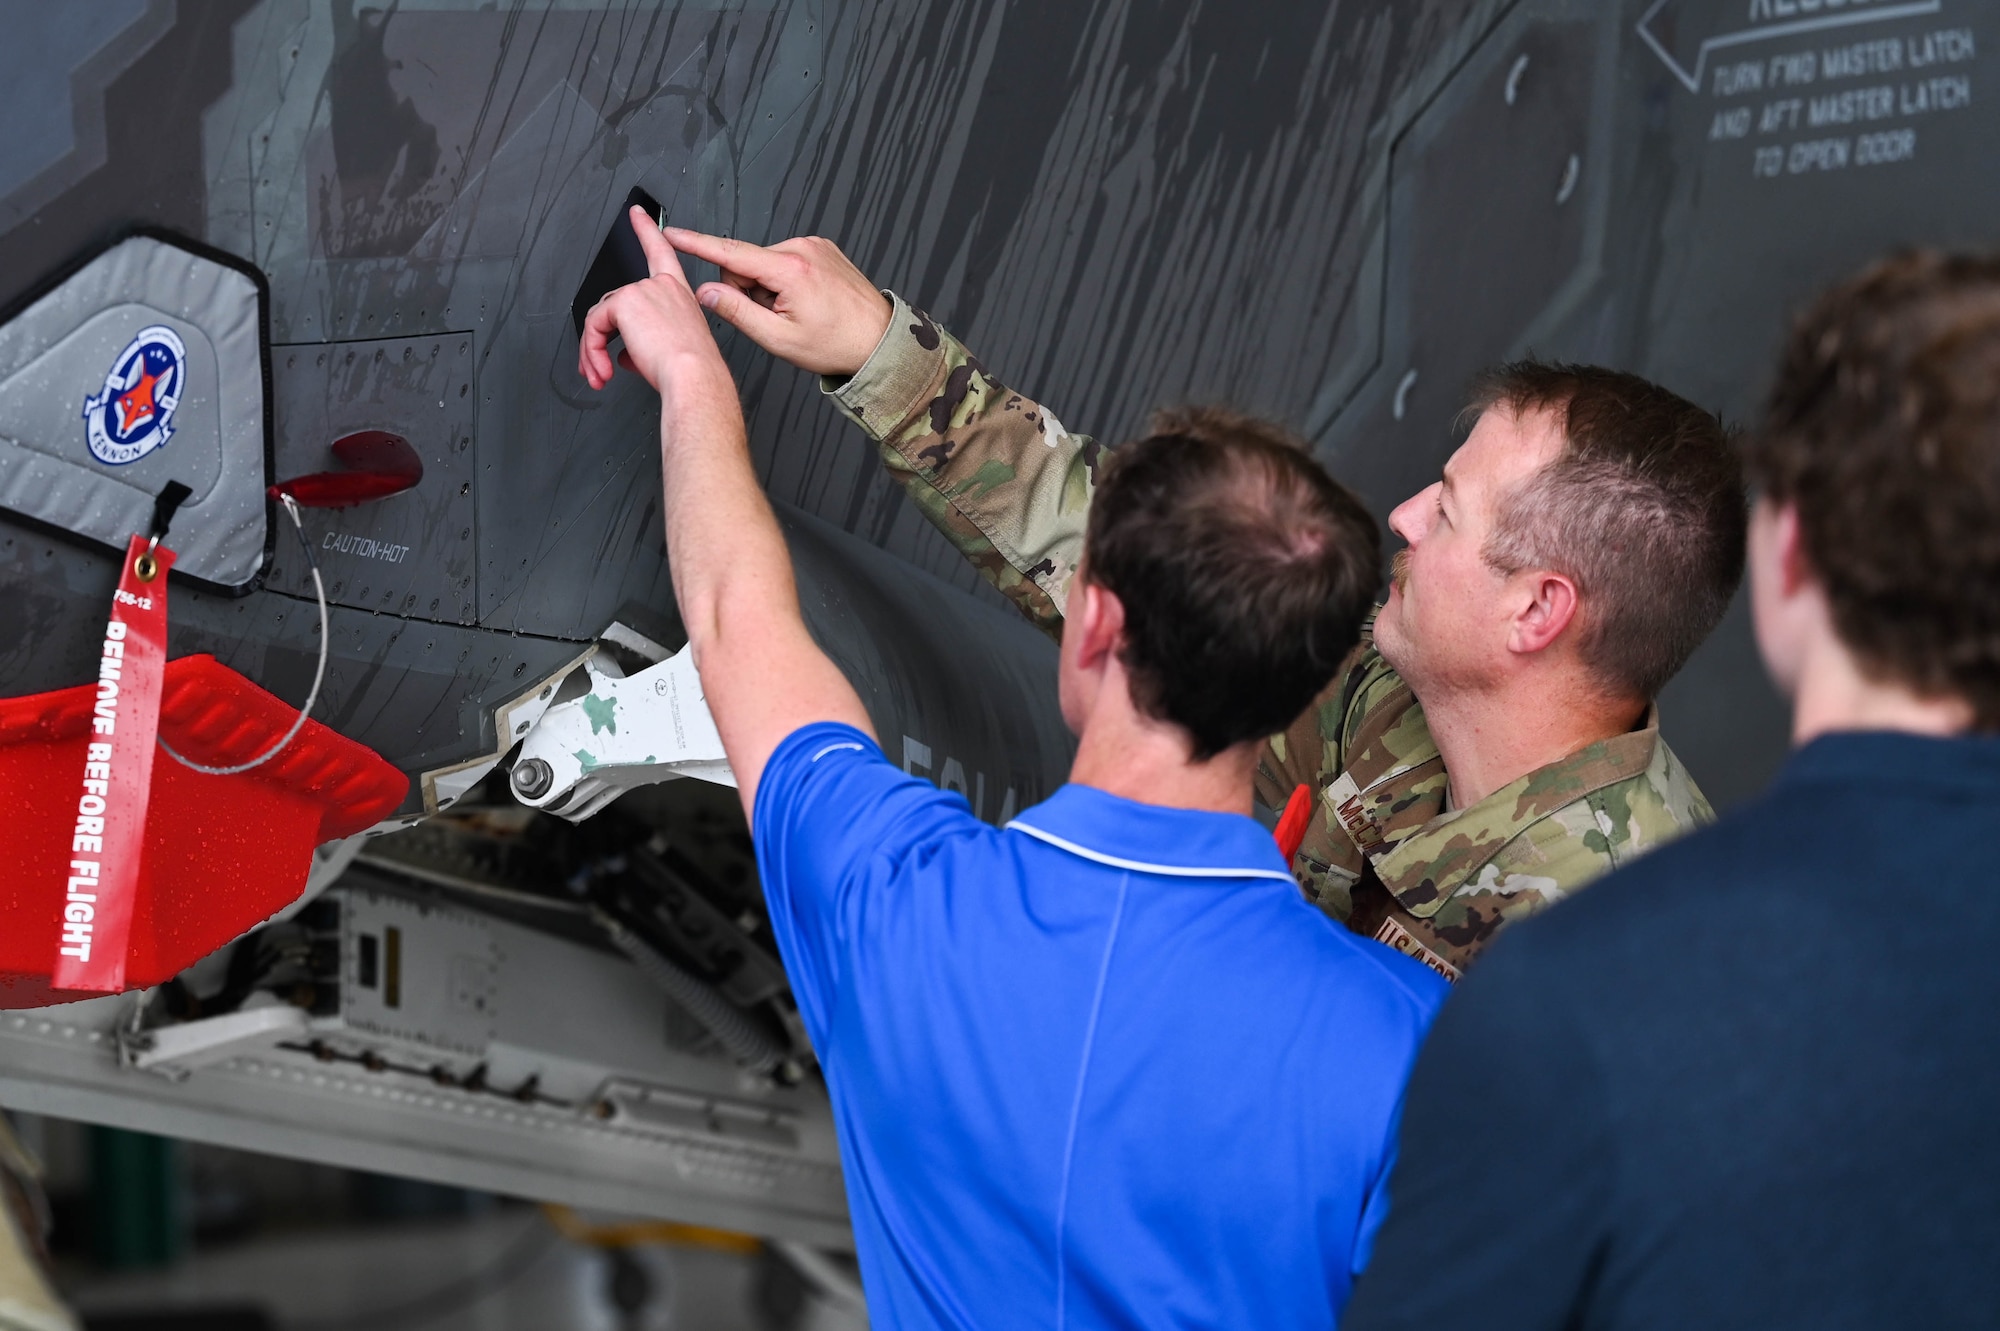 U.S. Air Force Tech. Sgt. Andrew McCamish, a 58th Aircraft Maintenance Unit aircraft section chief, and U.S. Air Force Staff Sgt. Tyler Schmitt, a 33rd Maintenance Group quality assurance inspector, developed reusable wash covers and a new canopy cover for the F-35A Lightning II at Eglin Air Force Base, Florida.